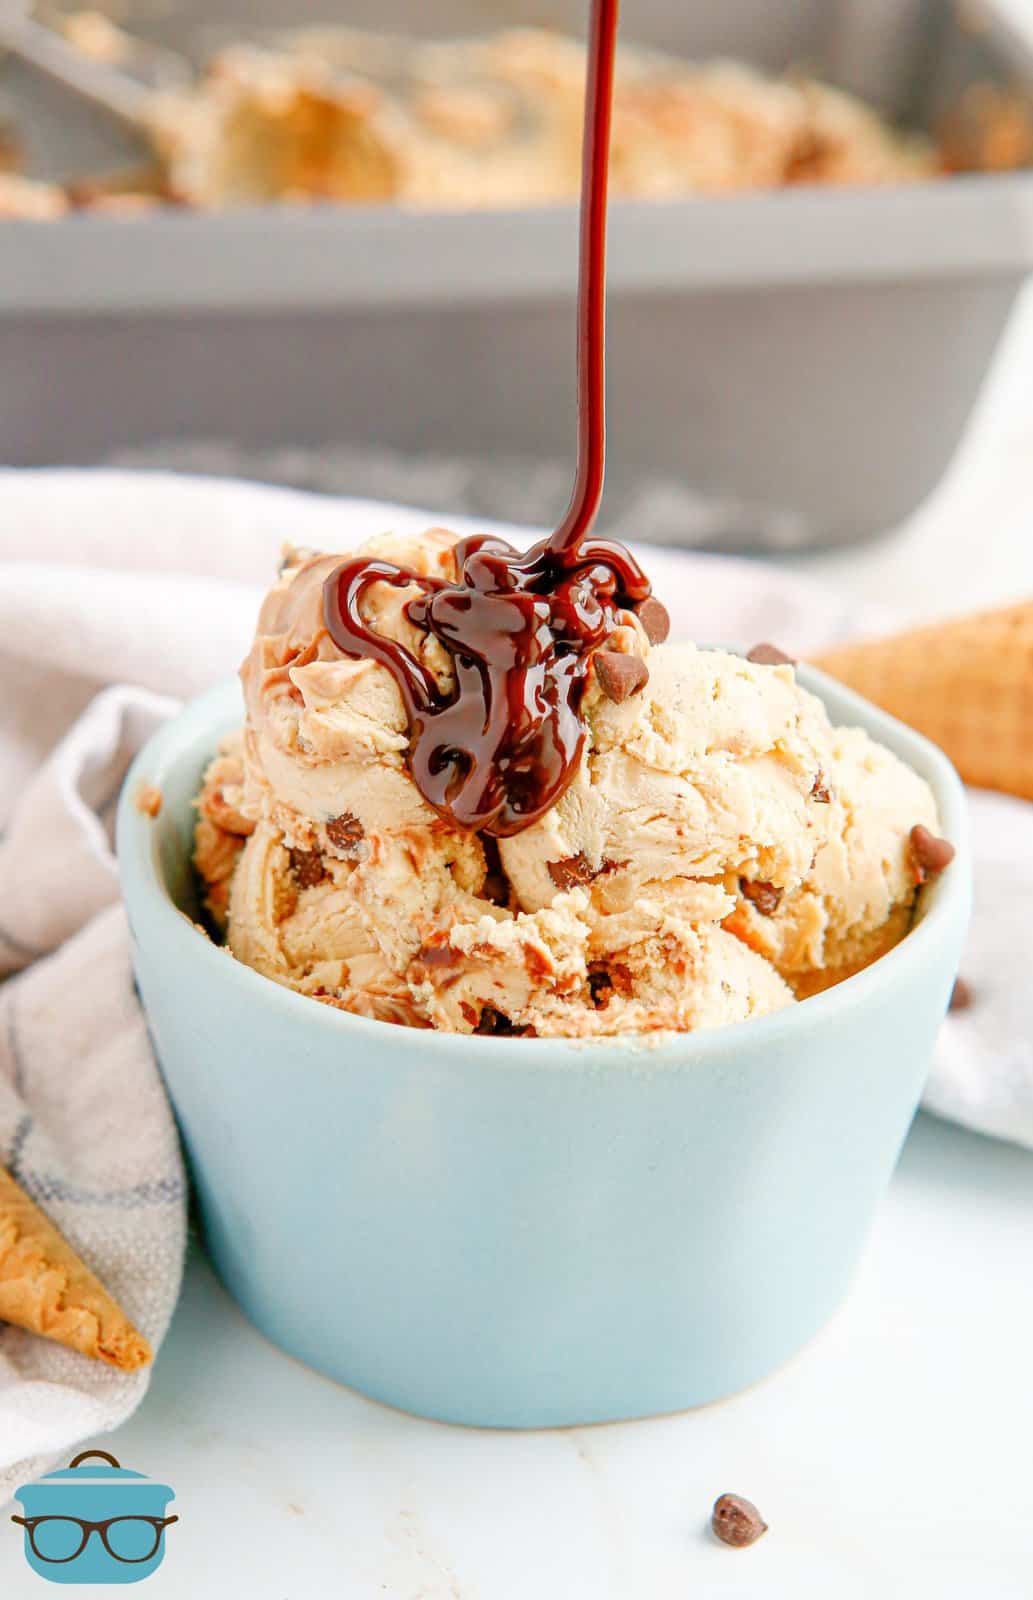 No-Churn Peanut Butter Chocolate Chip Ice Cream in bowl with chocolate being drizzled on top.